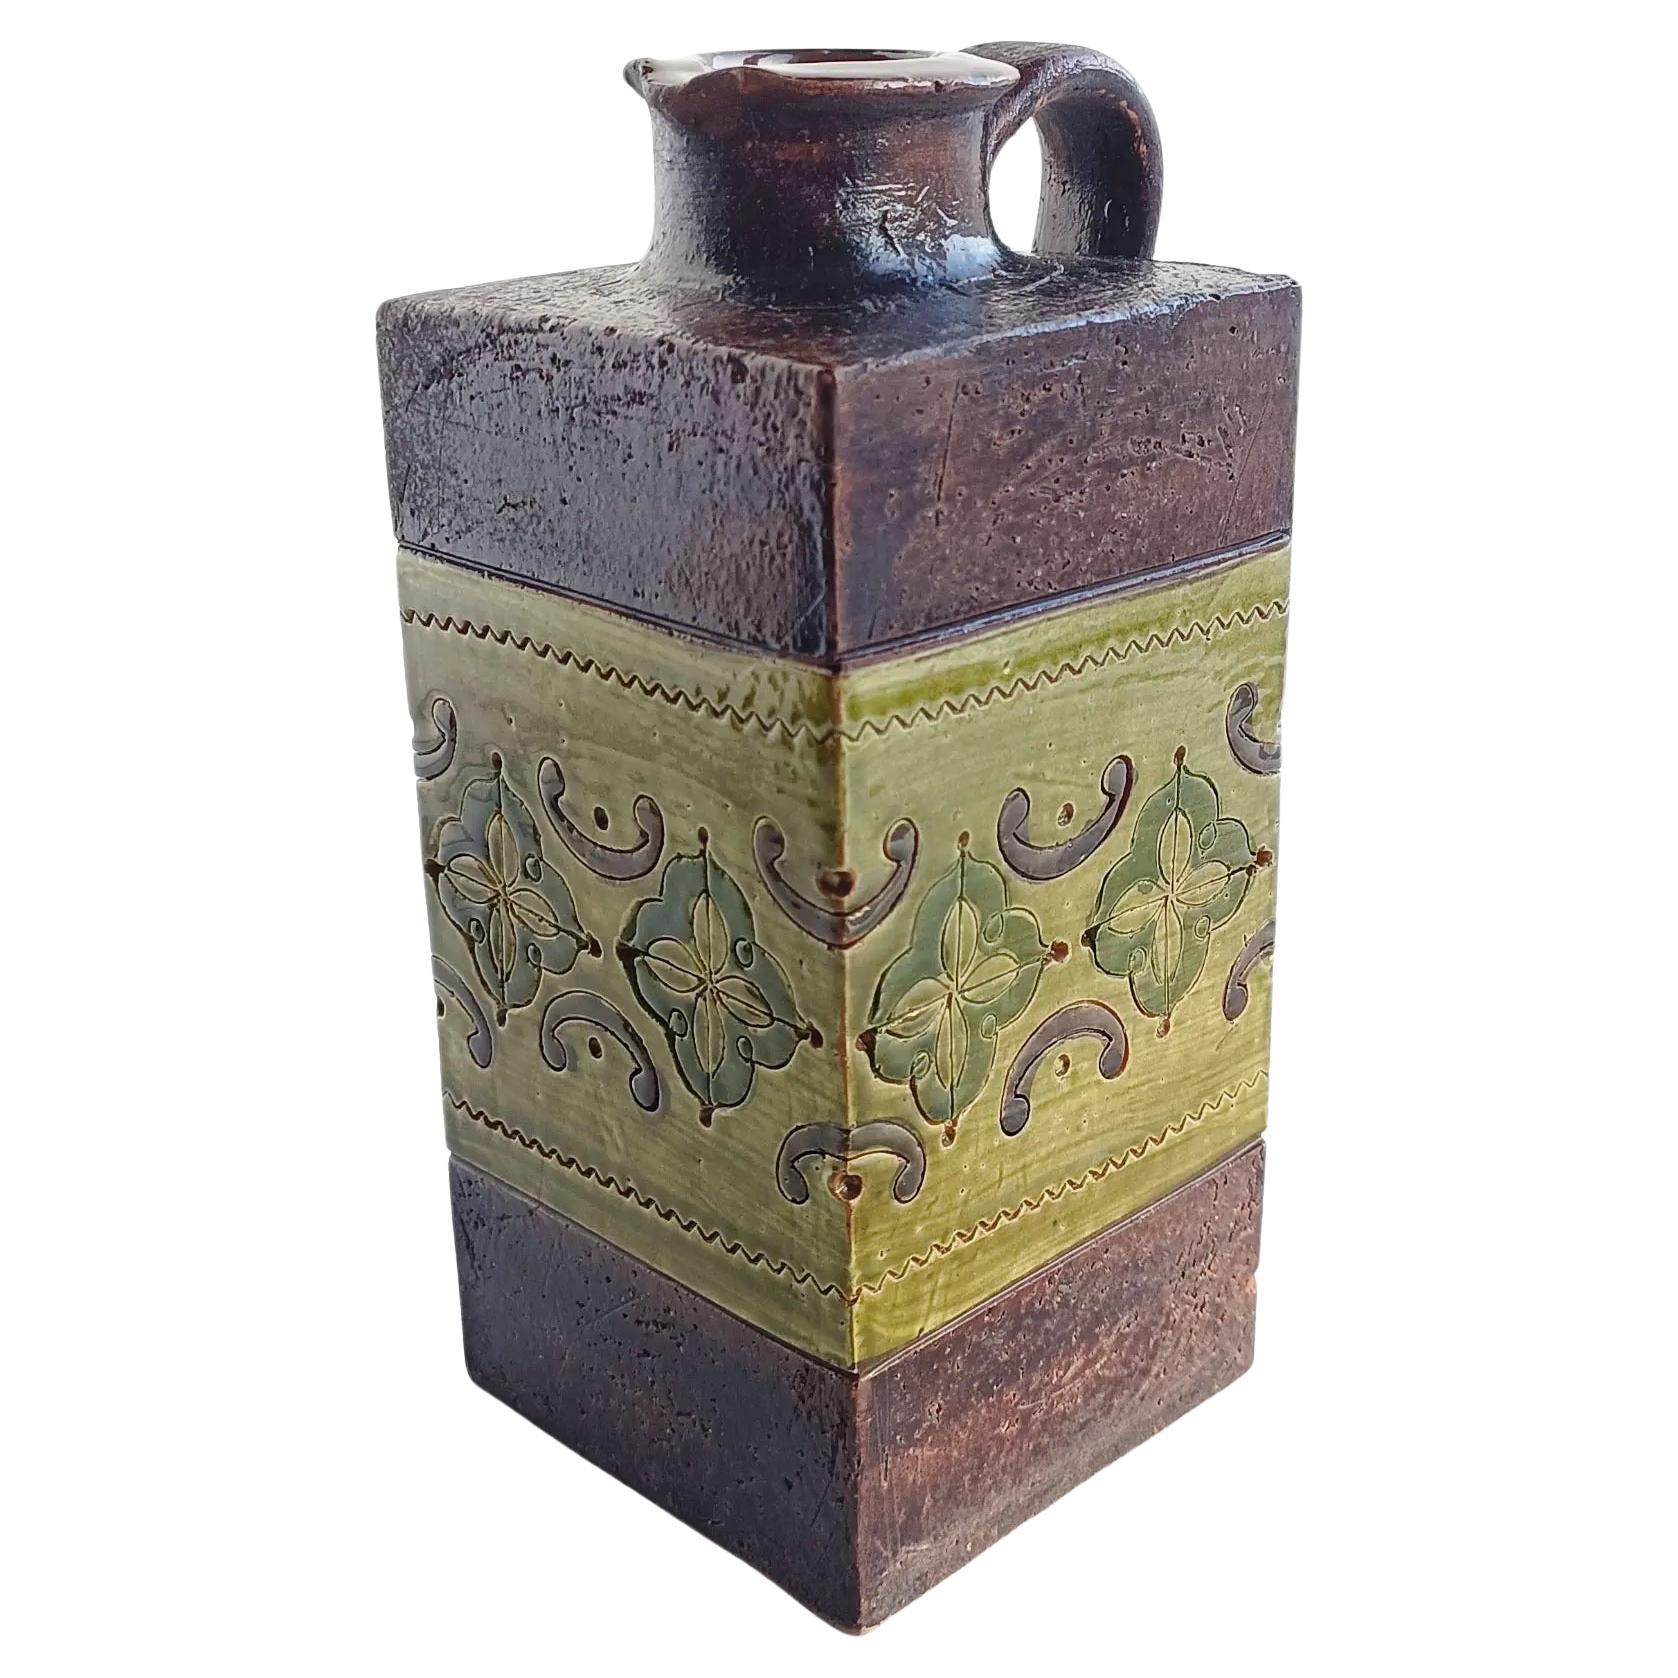 This gorgeous Italian vintage ceramic pitcher by Aldo Londi for Bitossi features  a glazing central band of the Arabesque decor in two different shades of green and the house signature dark brown rough surface, so characteristic of the Bitossi